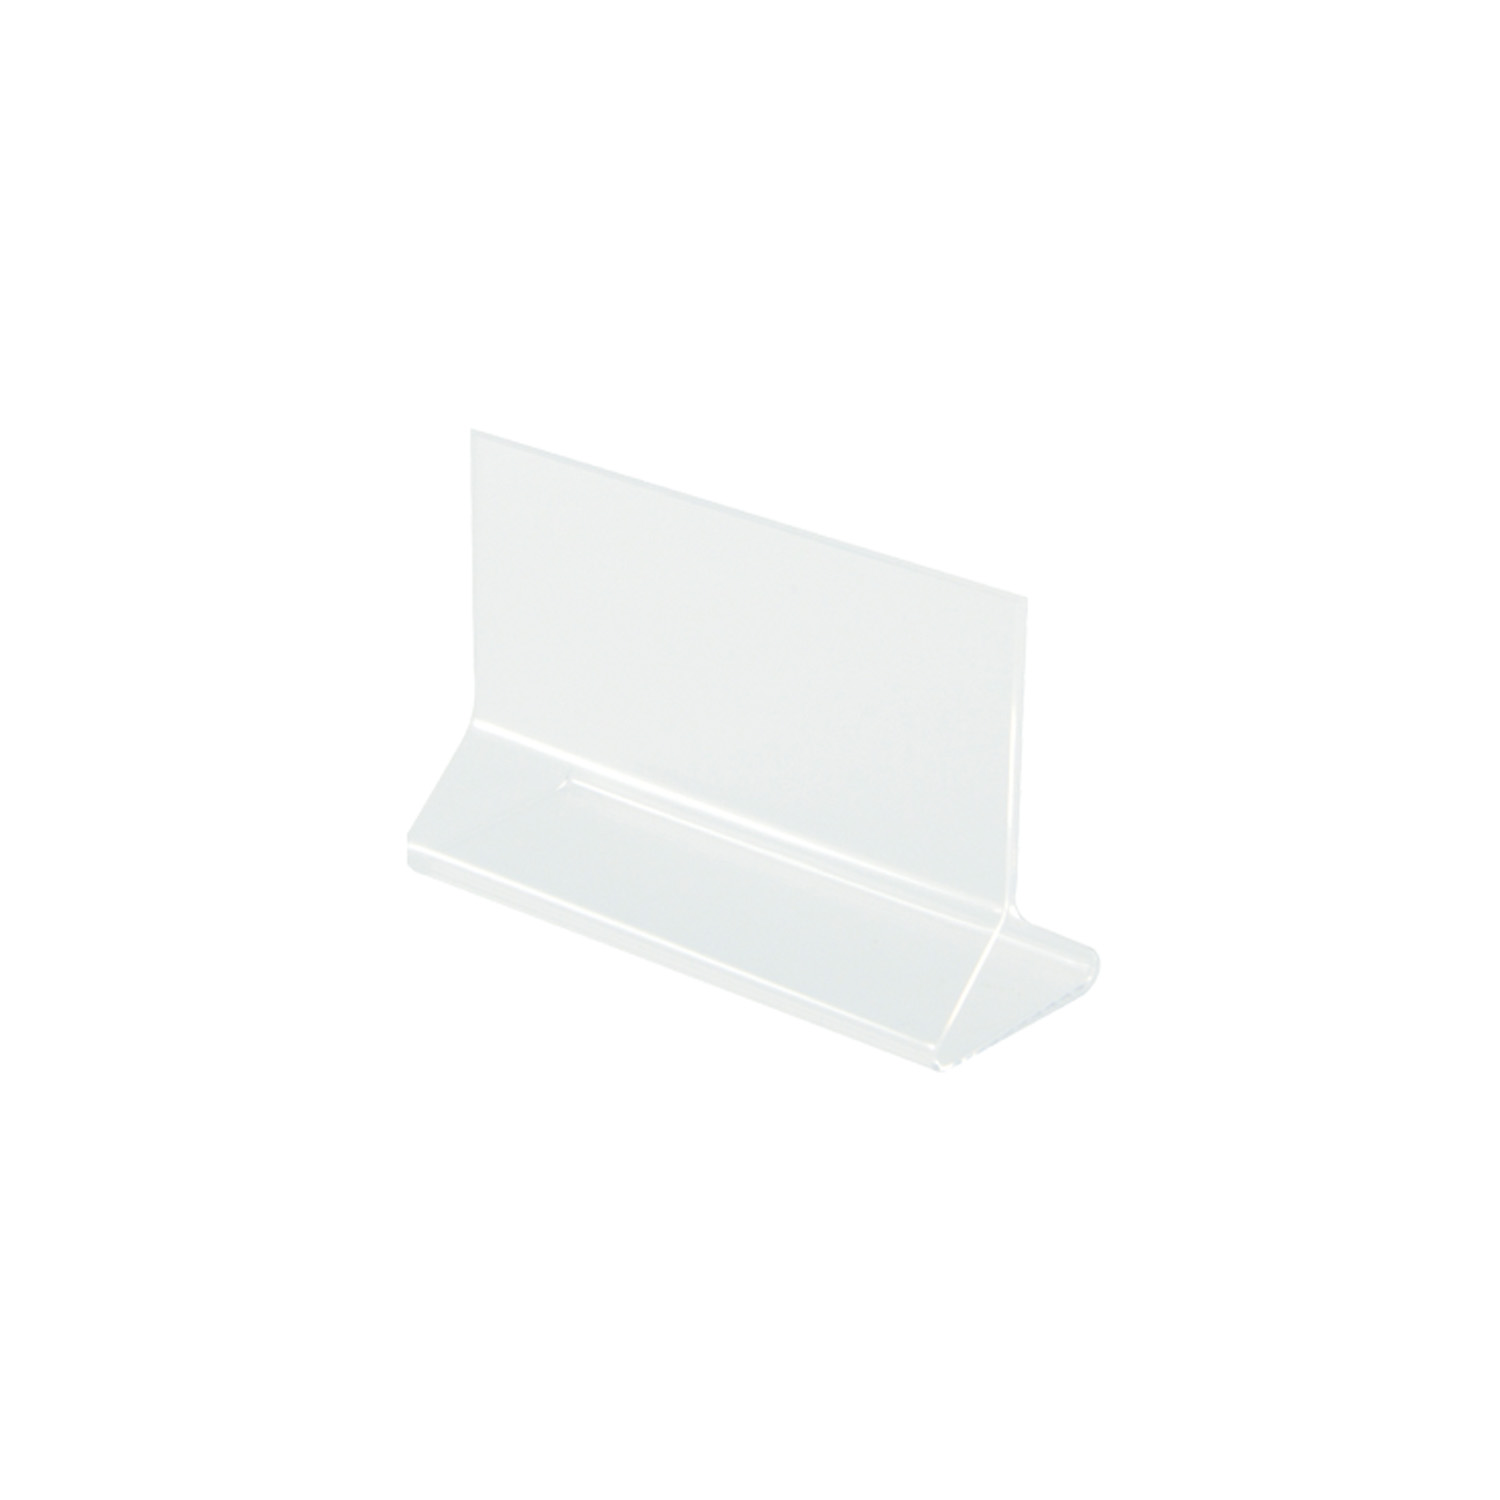 CAC China ACTH-53 Acrylic Tabletop Card Holder 5-1/2" x 3-1/2"